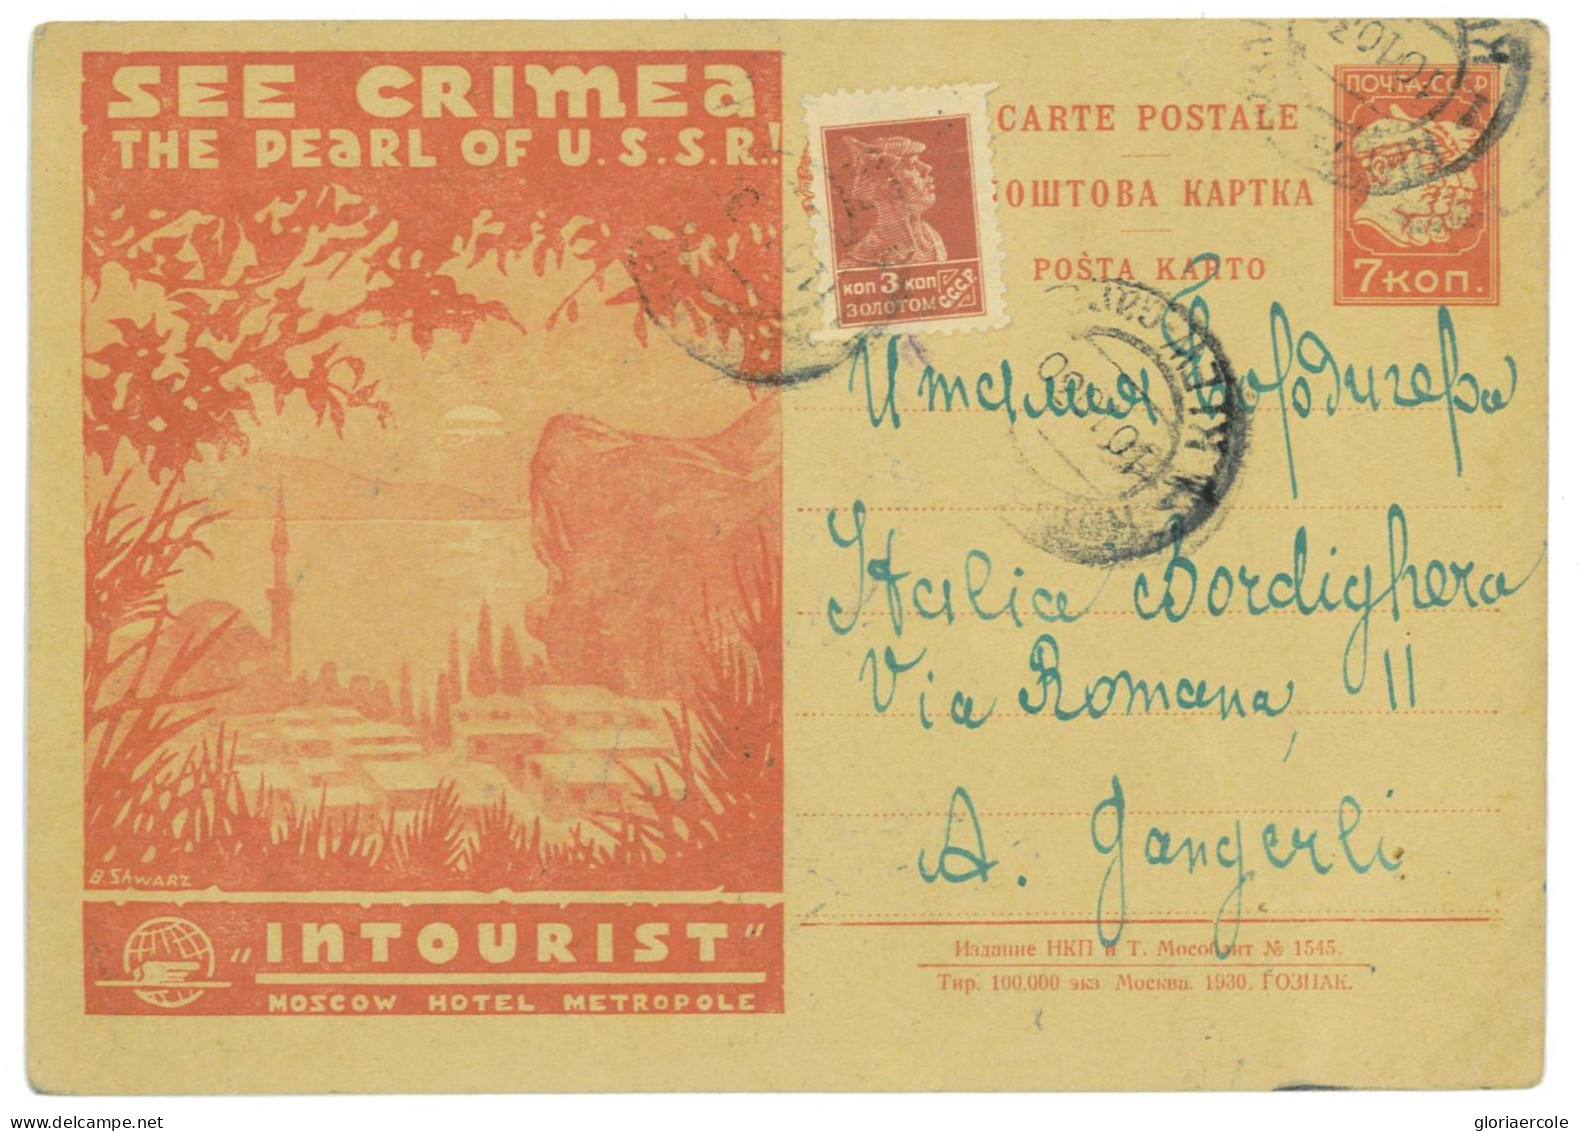 P2924 - RUSSIA POSTAL STATIONERY FRANKED WITH ADDITIONAL 3 KOPEK TO FORM A 10 KOPEK RATE TO ITALY, MICHEL P96/04 - Briefe U. Dokumente